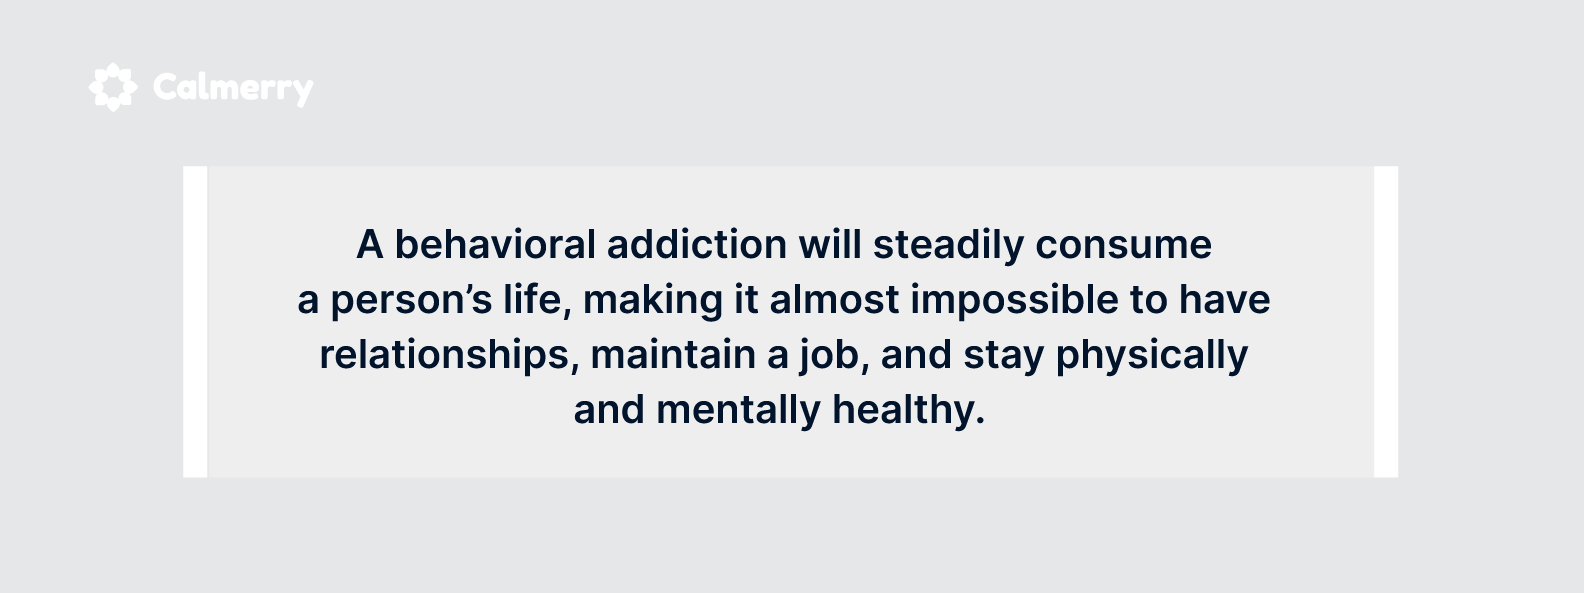 A behavioral addiction will steadily consume a person’s life